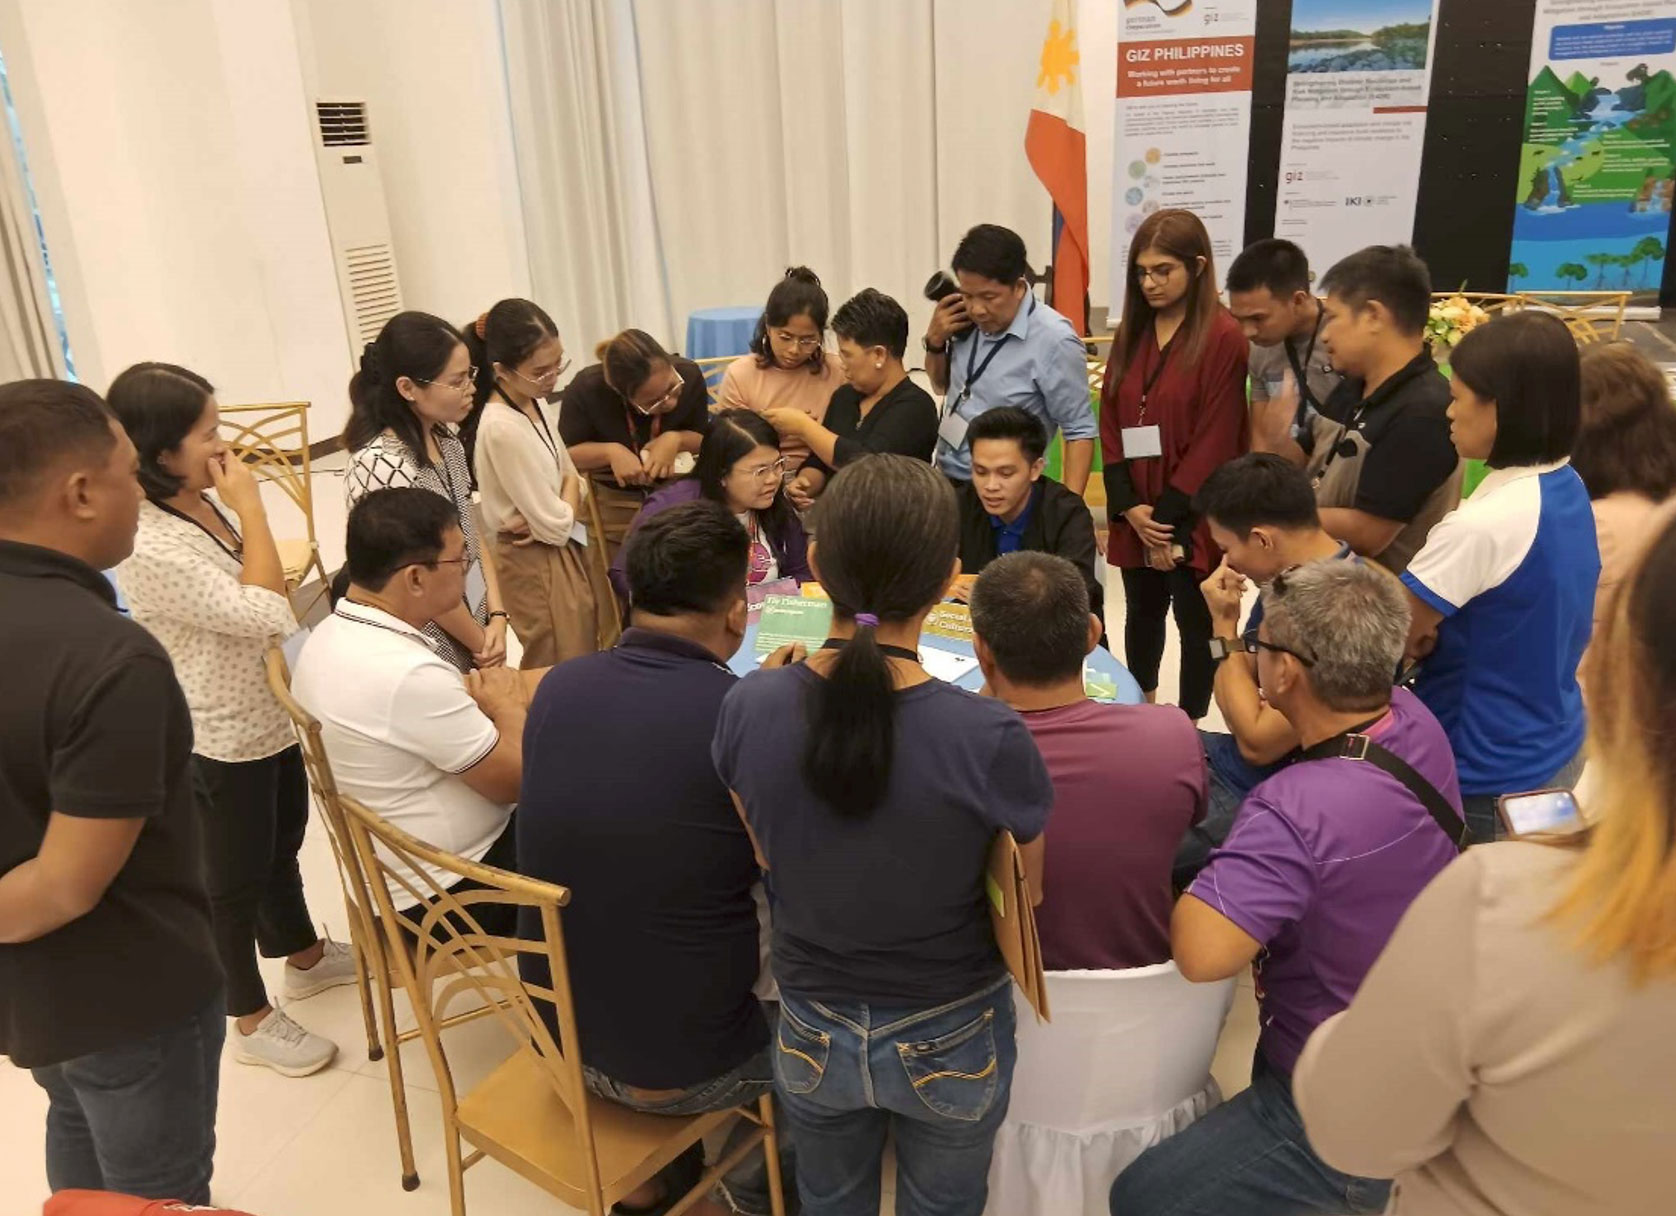 Workshop participants from various local government units performing the ‘Make-the-grade’, a game about natural resource and water management developed by University of Maryland and WWF.